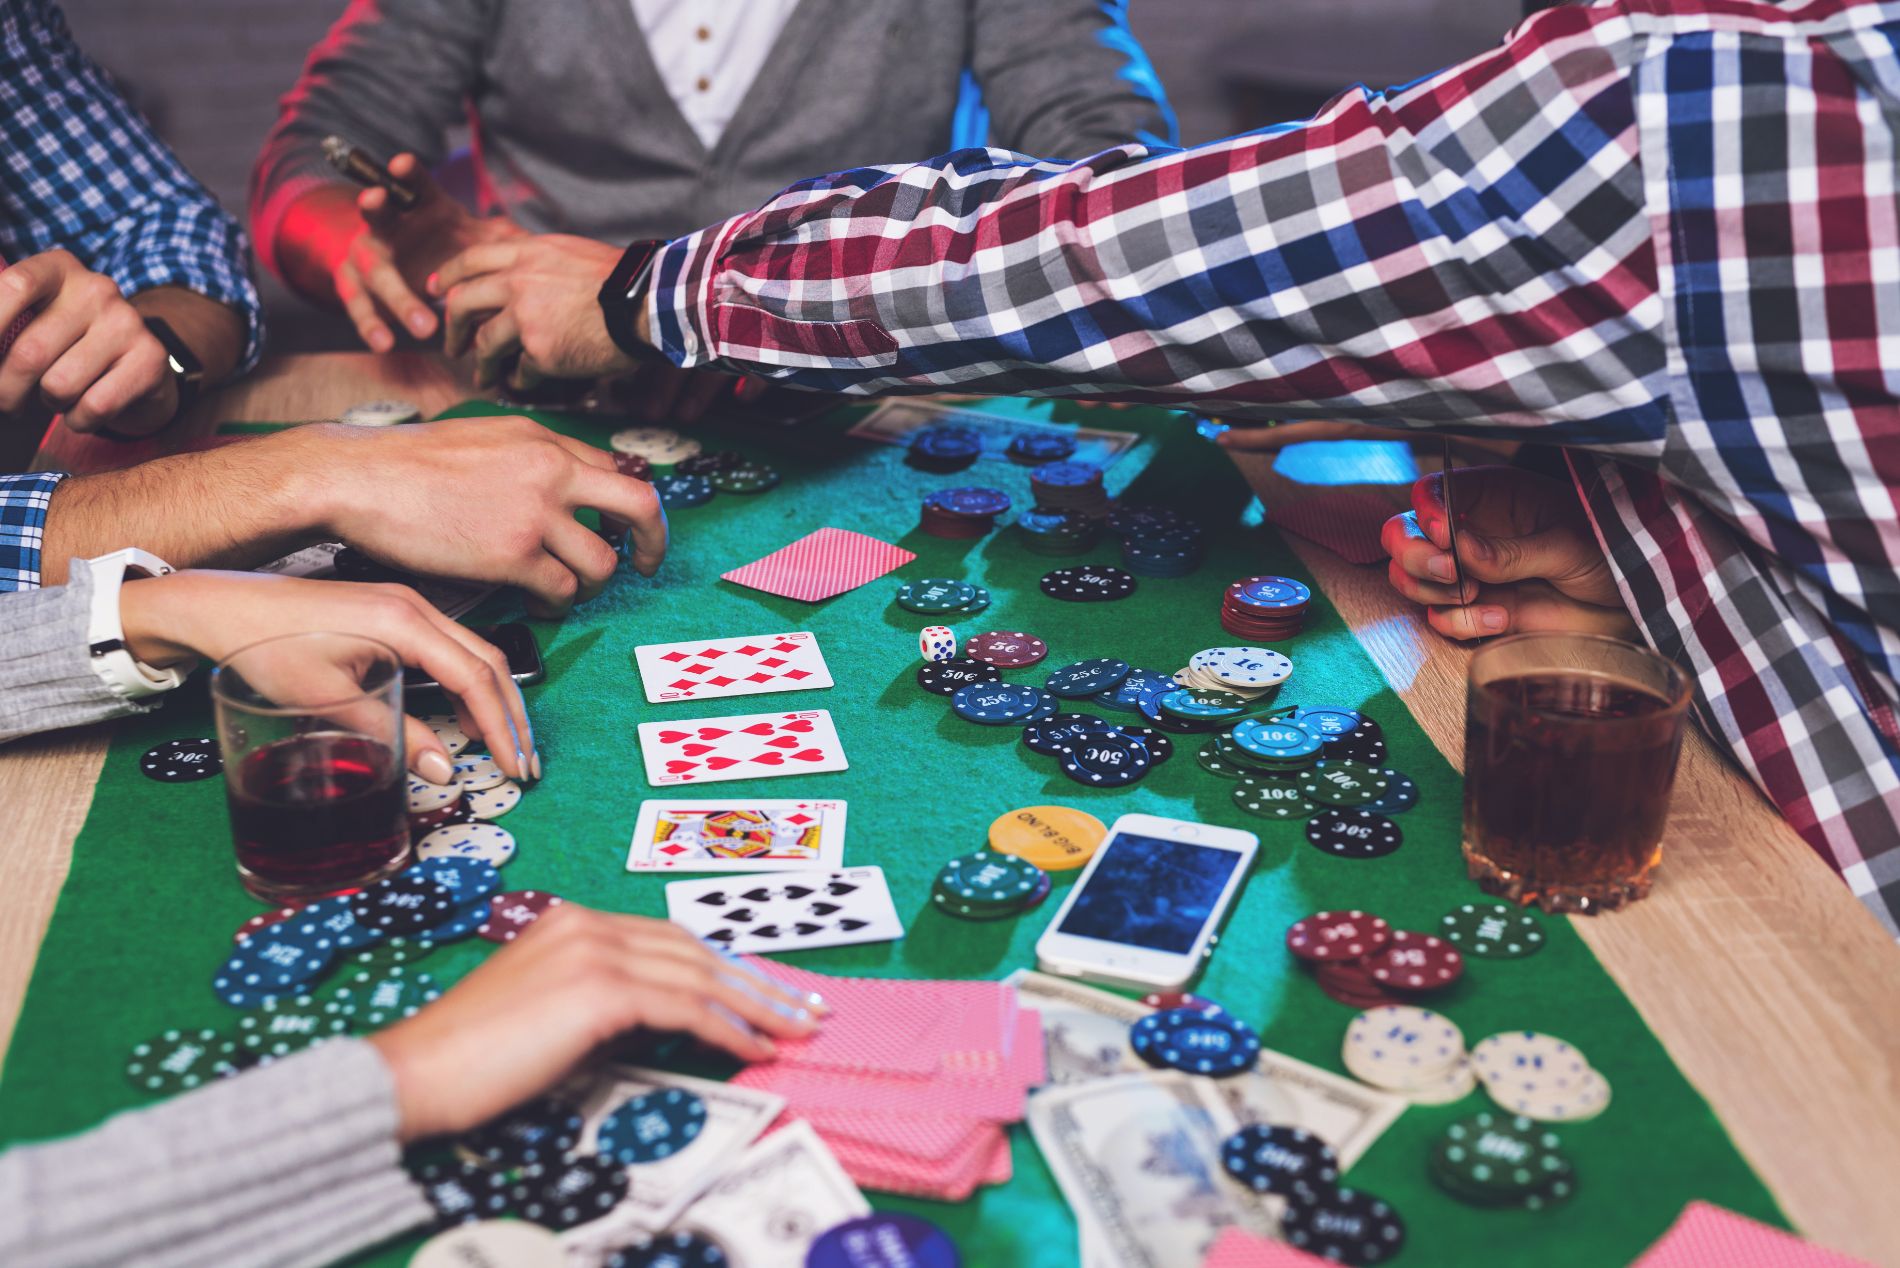 is online gambling legal in mississippi